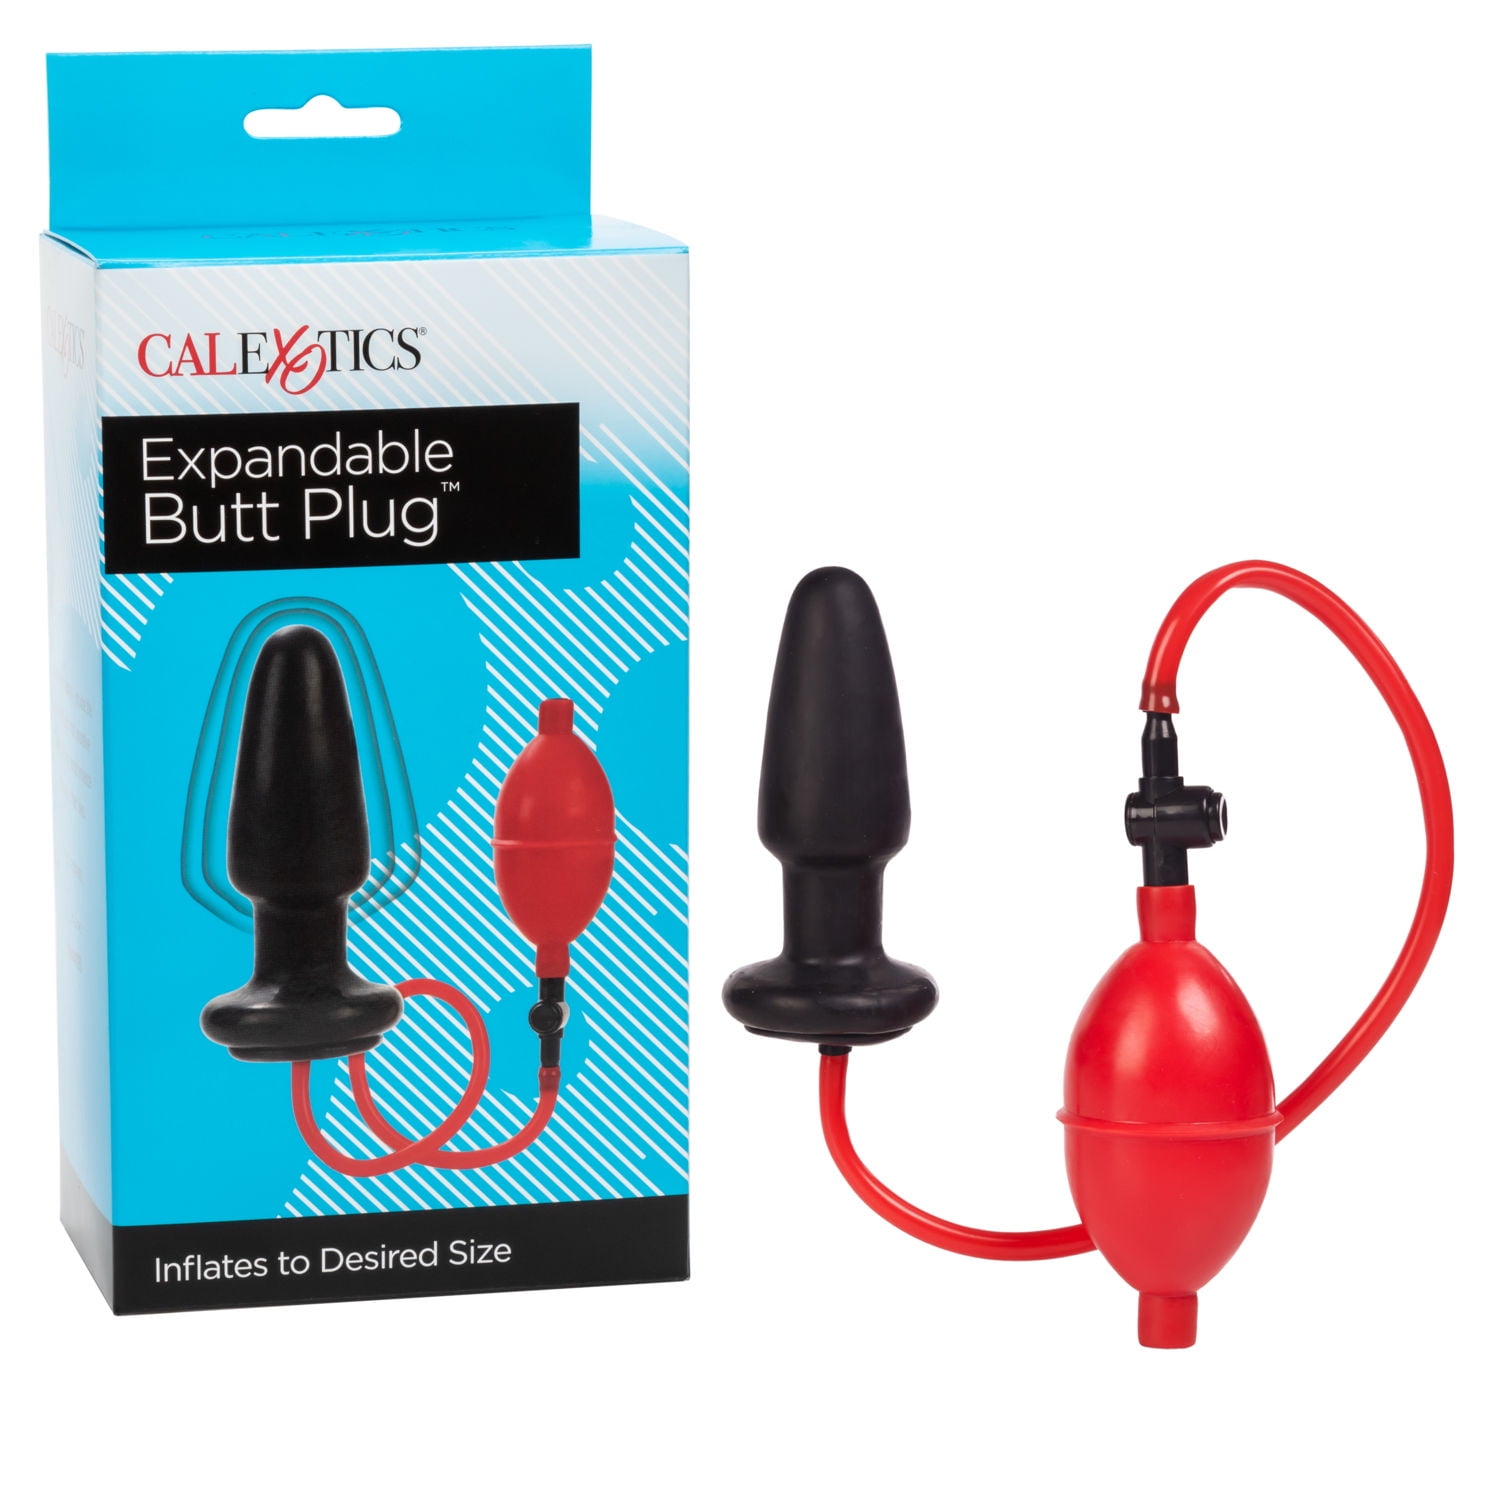 California Exotic Novelties Expandable Inflatable Anal Butt Plug for Desired Size- Black and